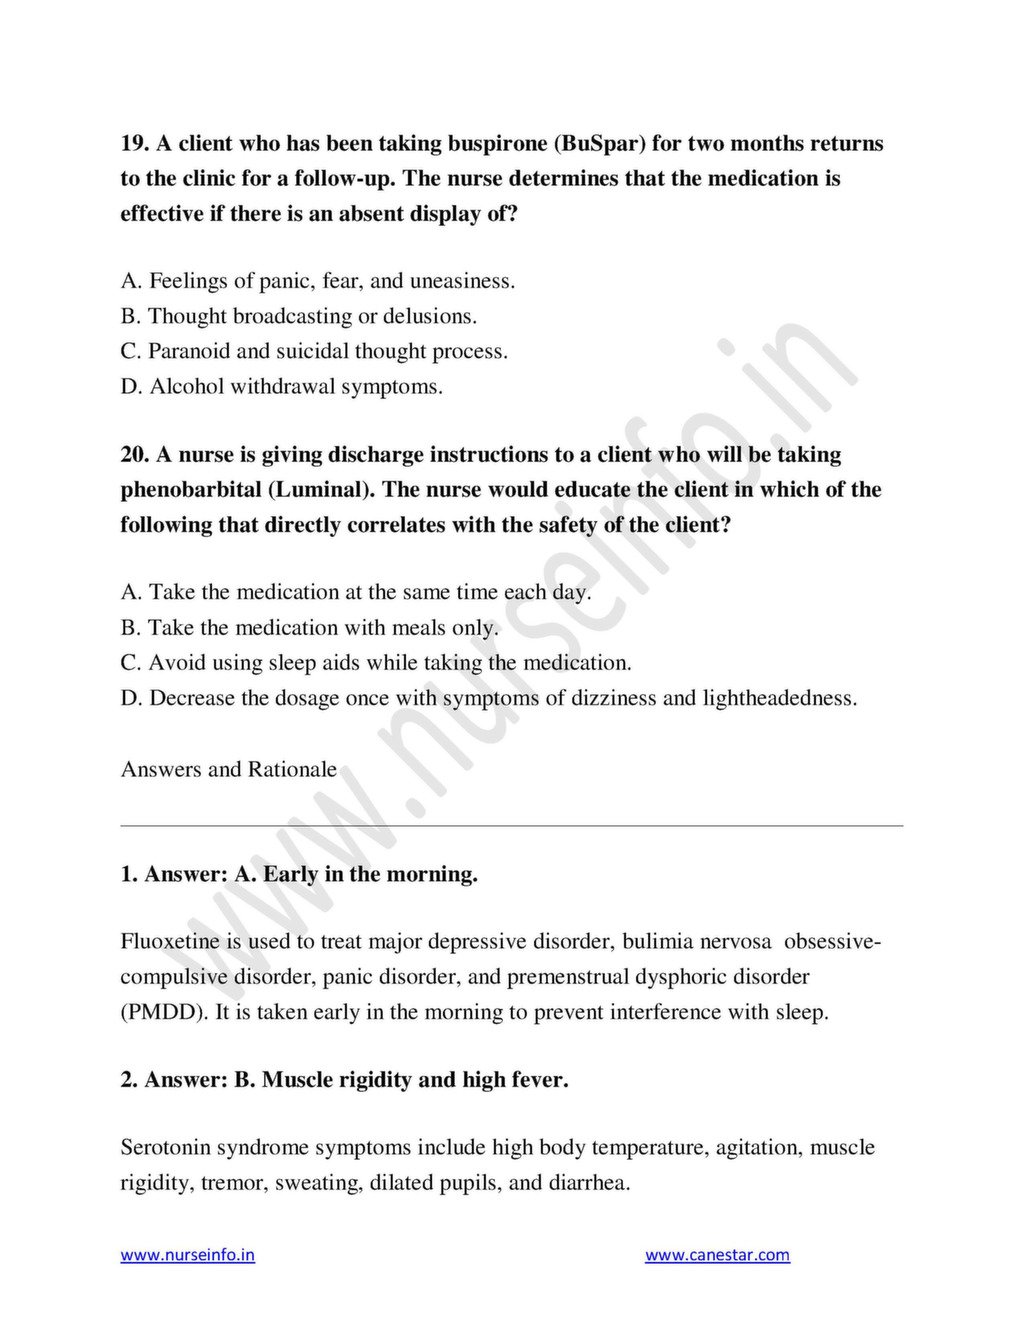 pharmacology essay questions and answers pdf